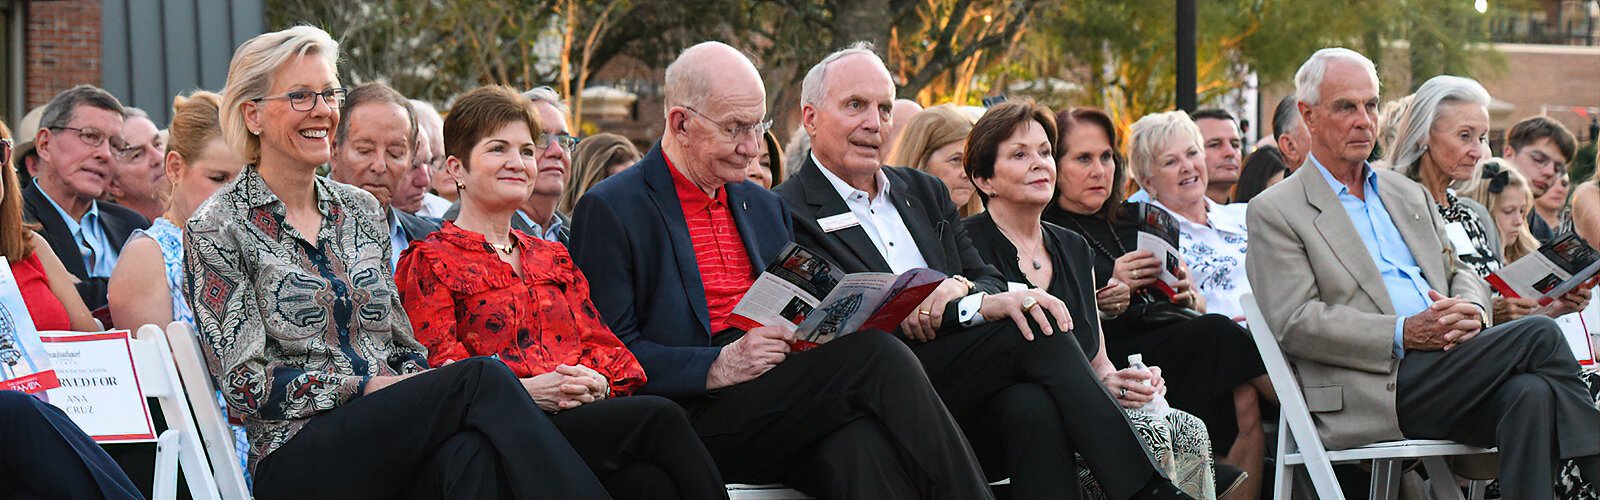 Joined by Tampa Mayor Jane Castor, UT supporters Susan and John Sykes and UT President Ron Vaughn and wife Renée attend the dedication concert that brings their vision to a triumphant conclusion.